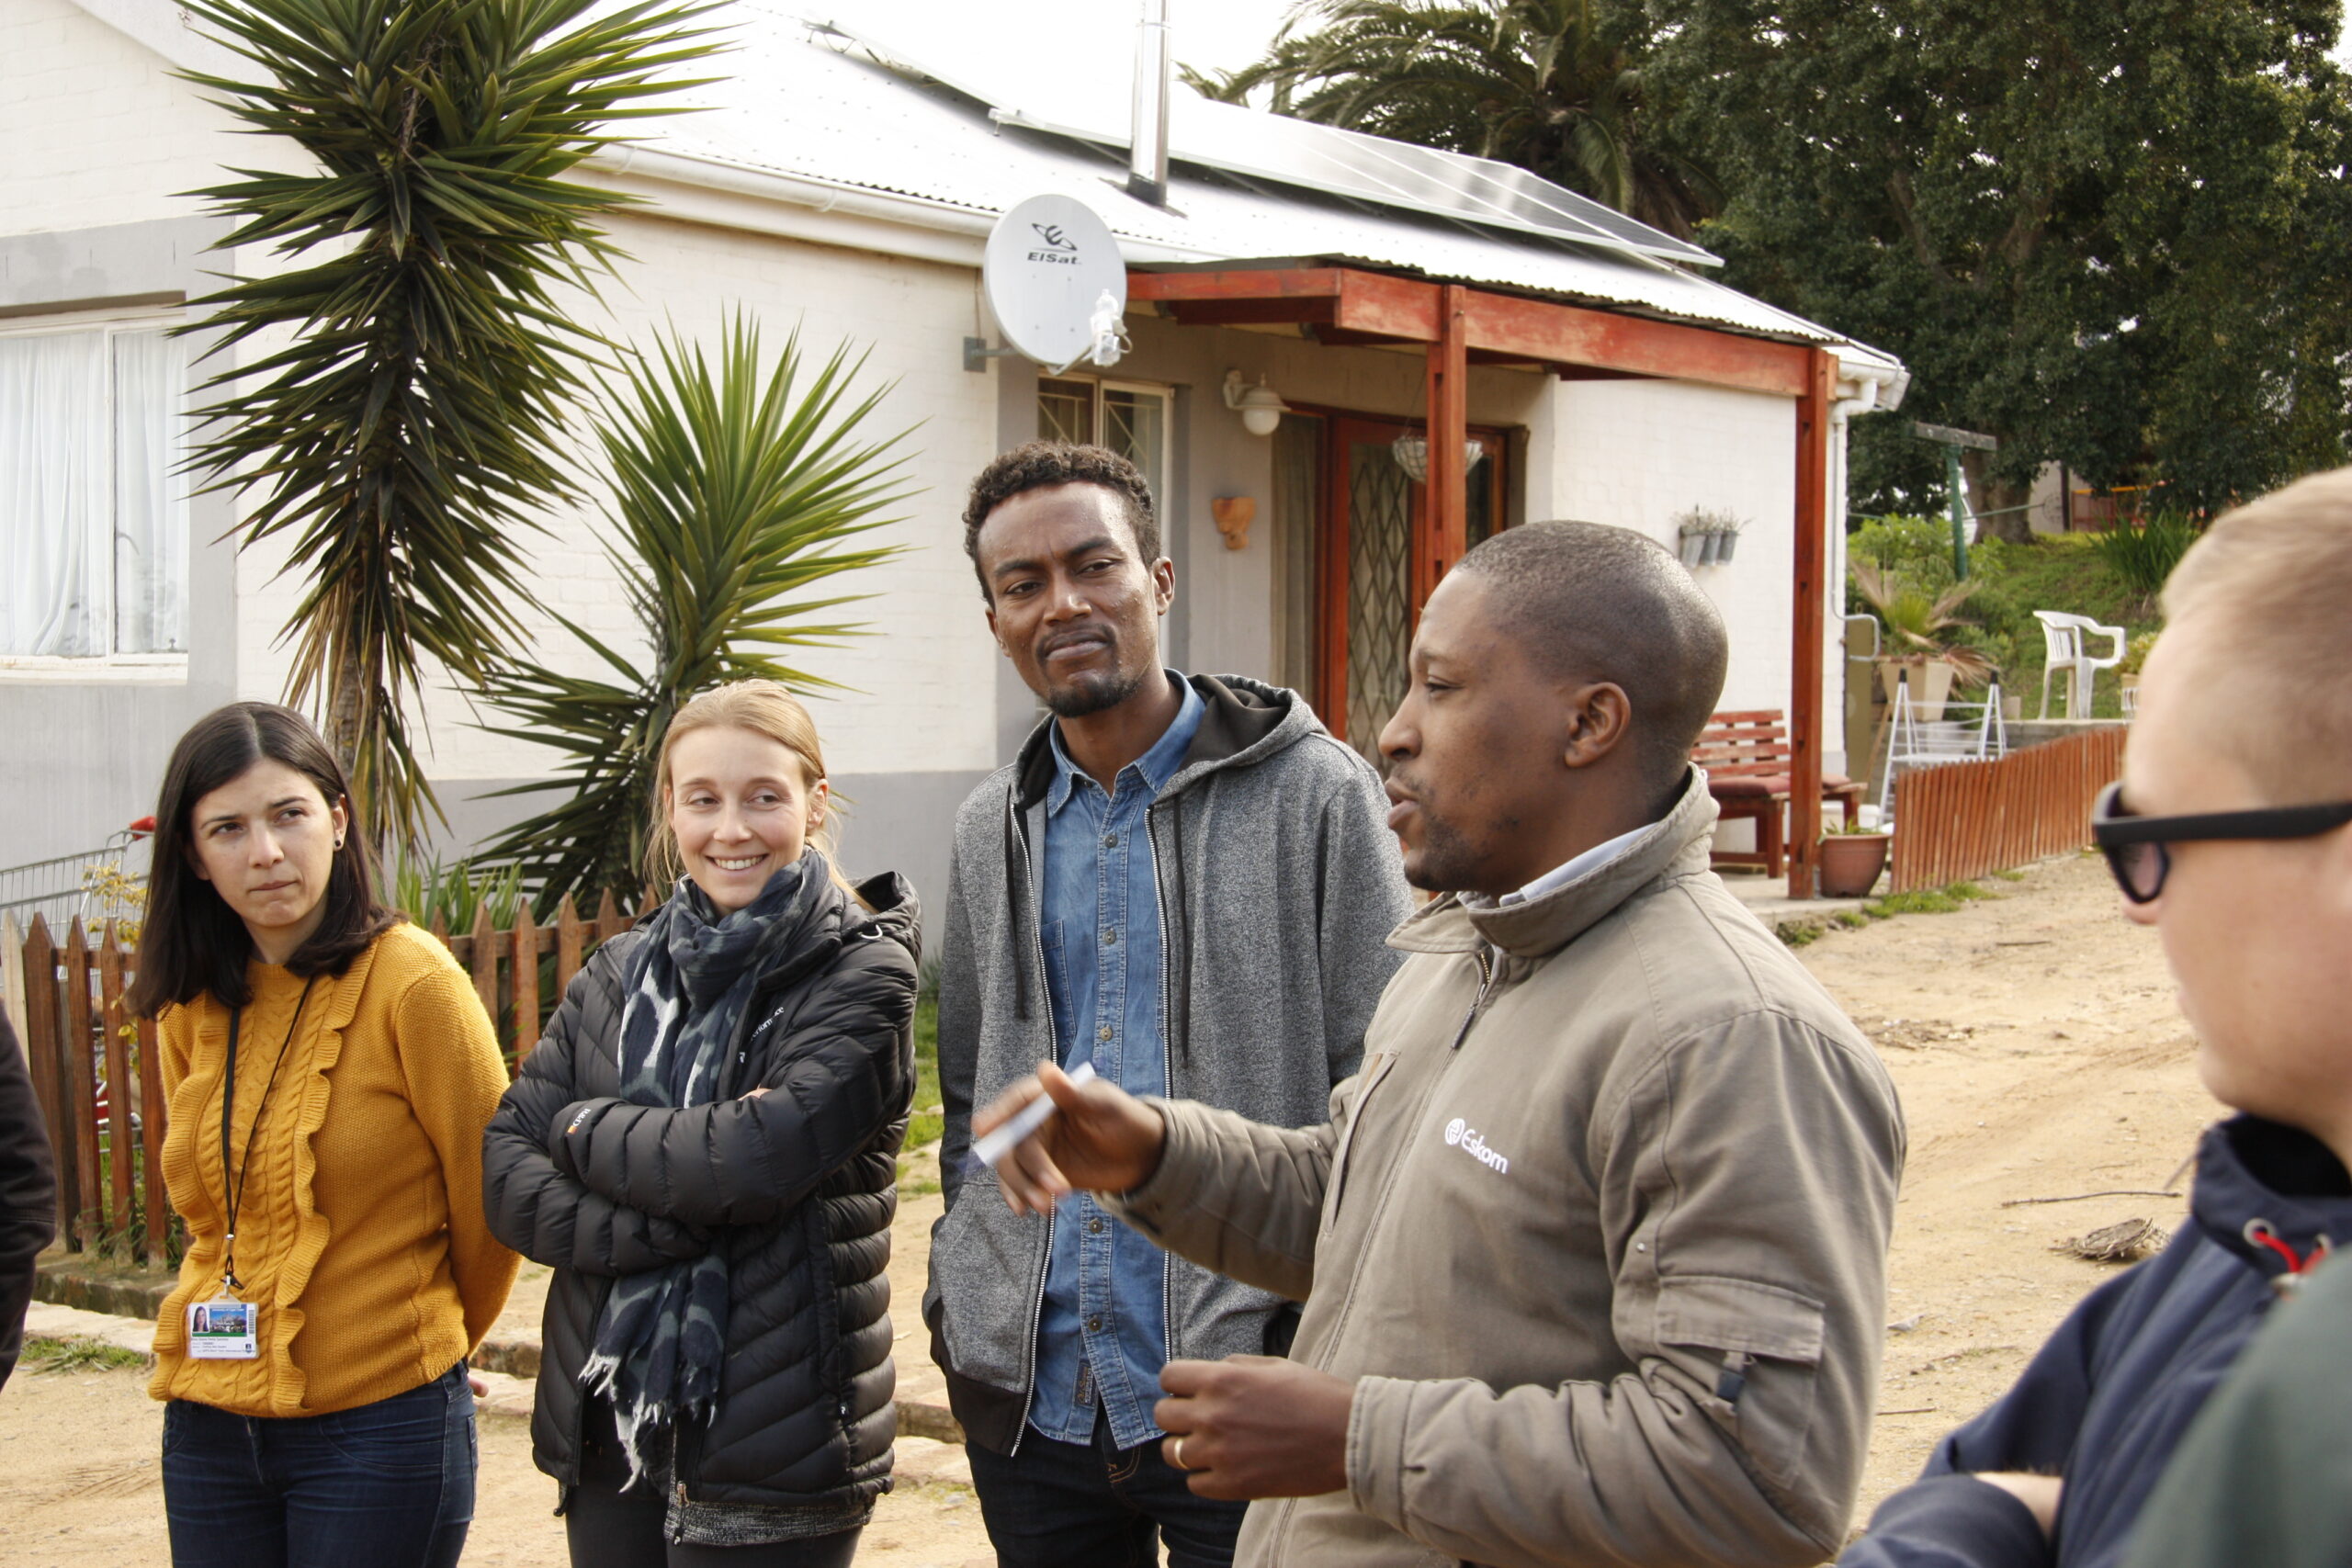 Excursion to the Lynedoch Eco Village outside of Stellenbosch. In the picture a empolyee from Eskom, the South African electricity public utility, explains about microgrids. Photo credit: Energy Politics Group and ETH Global.